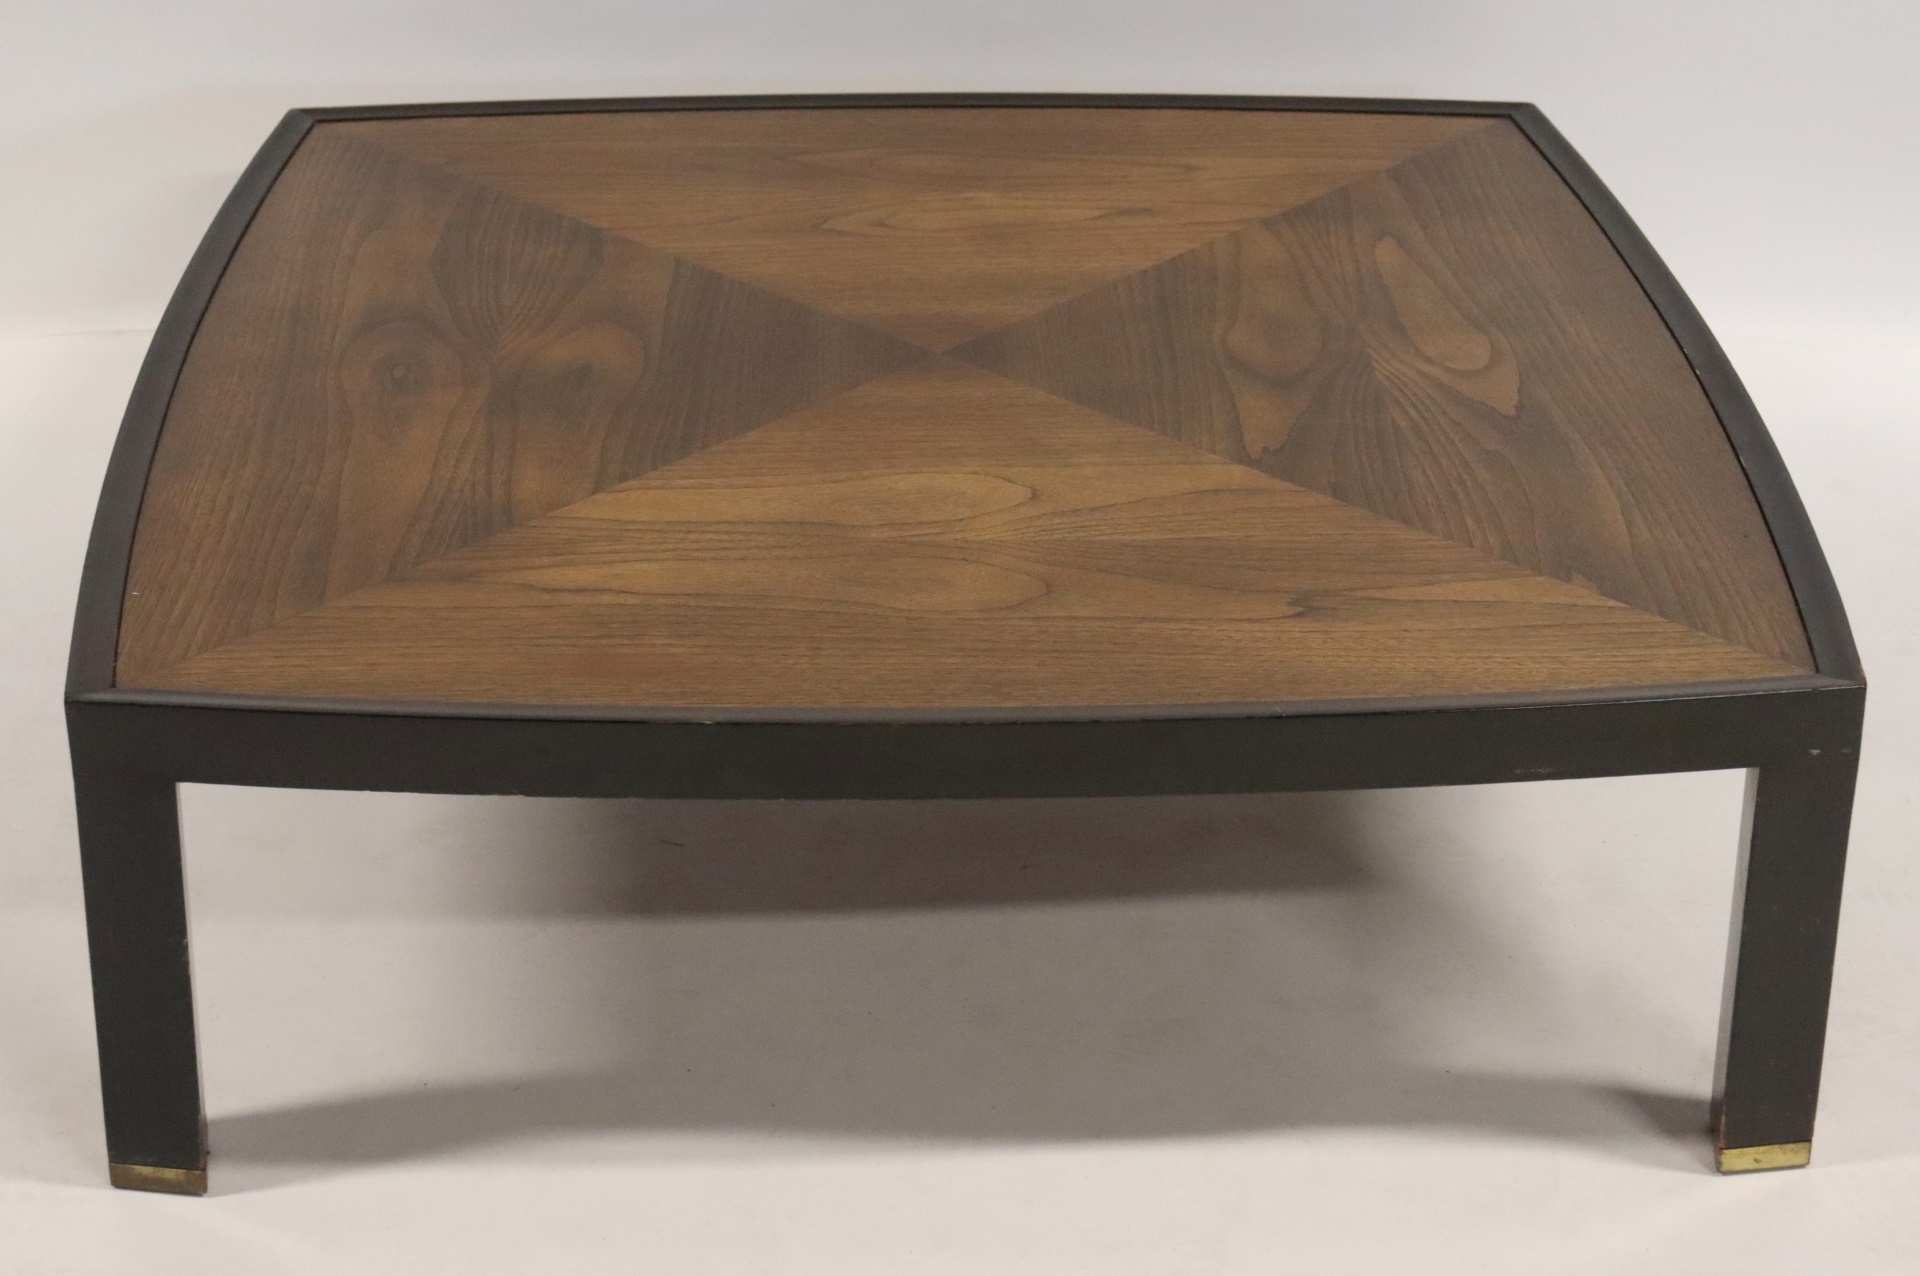 MIDCENTURY BANDED COFFEE TABLE 3b833e